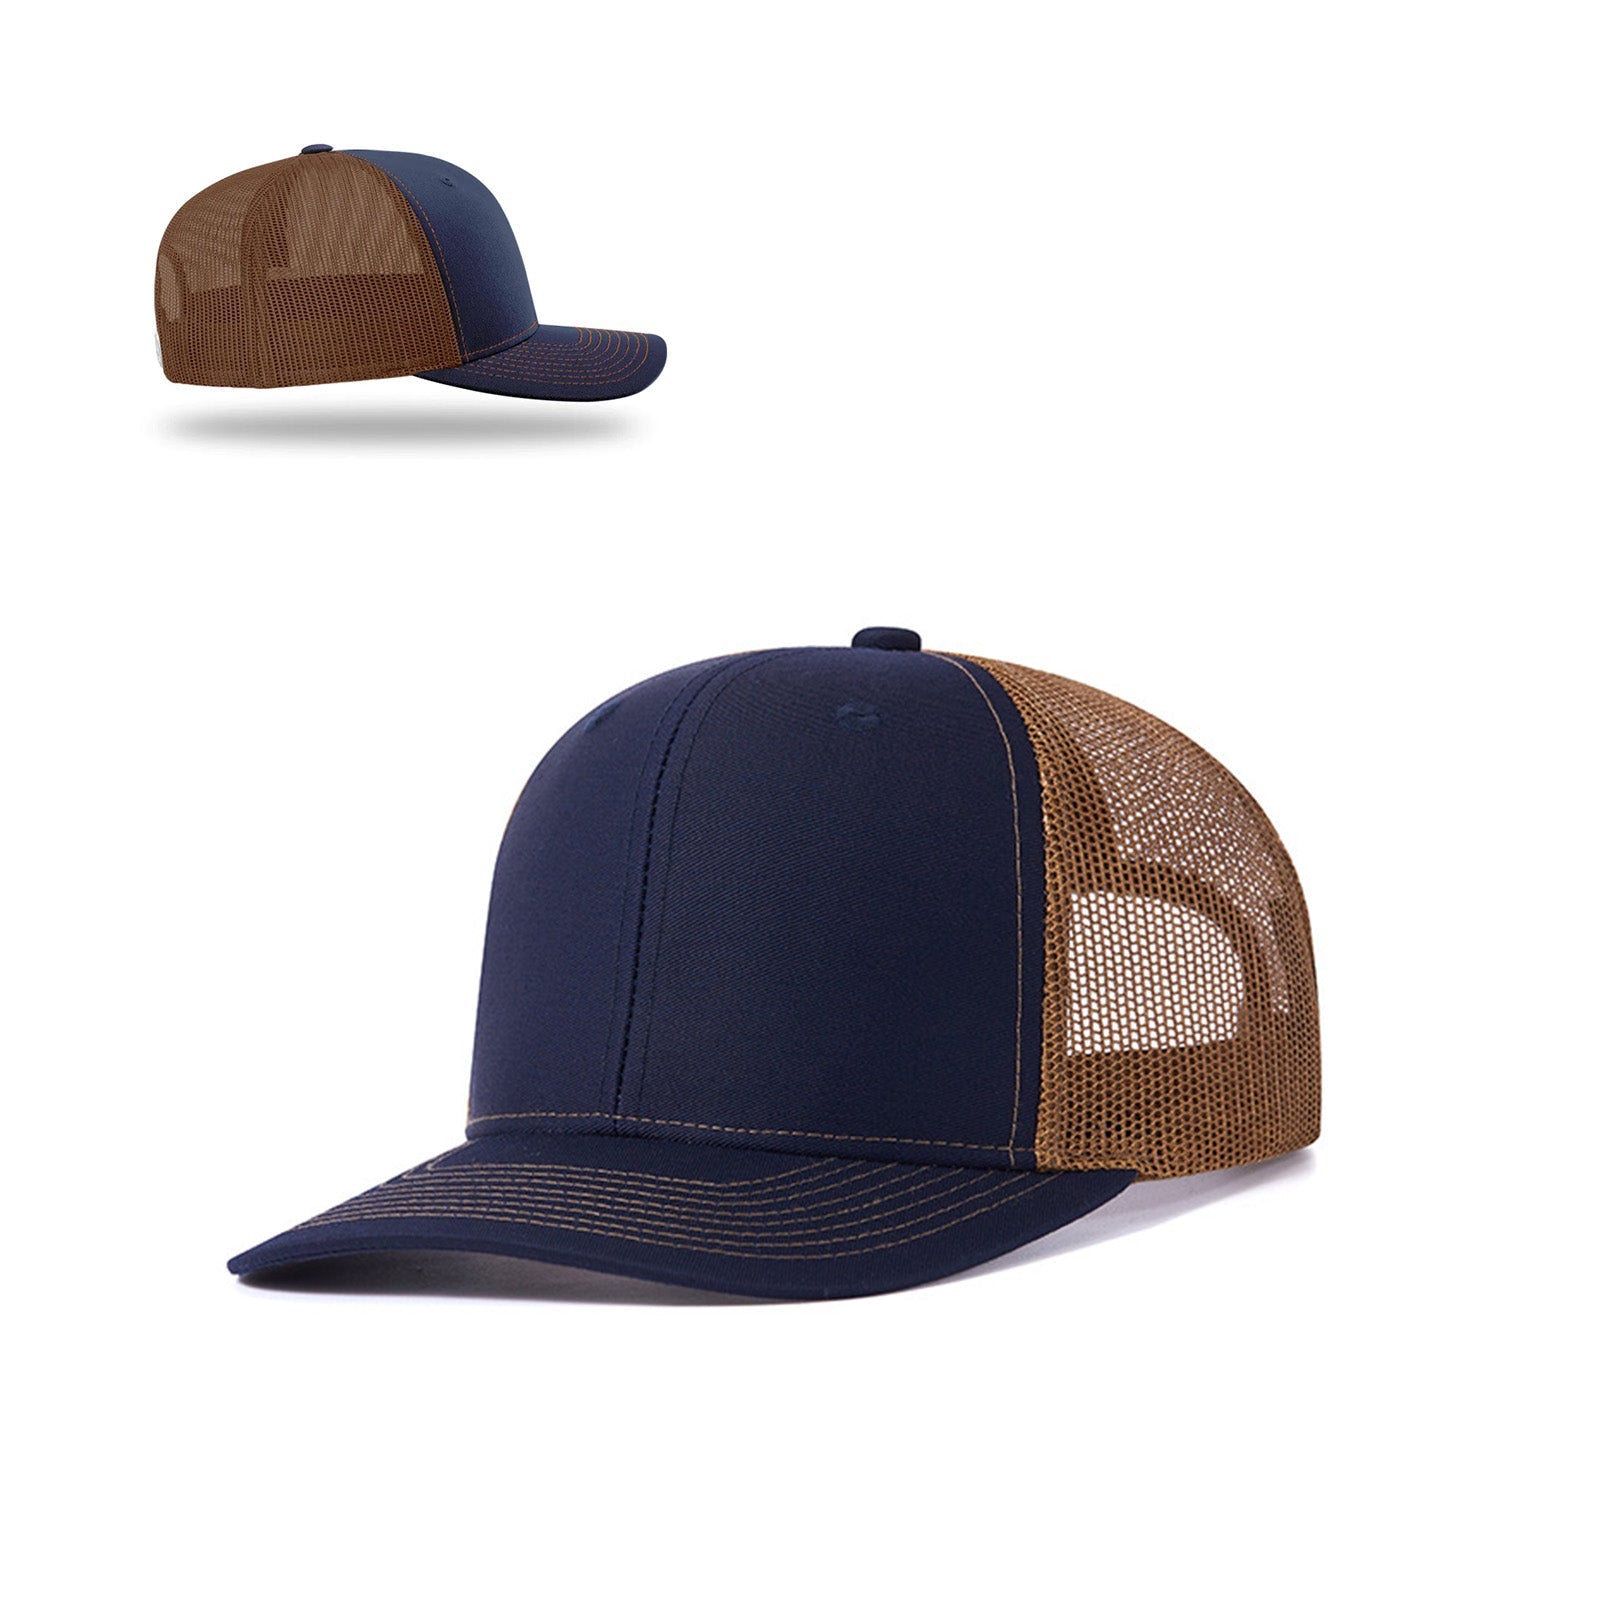 A dark blue and brown mesh trucker hat is shown from two angles on a white background. The front panel and bill of the hat are dark blue, while the back mesh and snap closure are brown. This trucker hat, a perfect gift for men, features engraved leather cap stickers. The CrealityFalcon 2 pcs Adjustable Mesh Trucker Hat with 4pcs Cap Stickers for Engraving in the background is displayed at a smaller size.